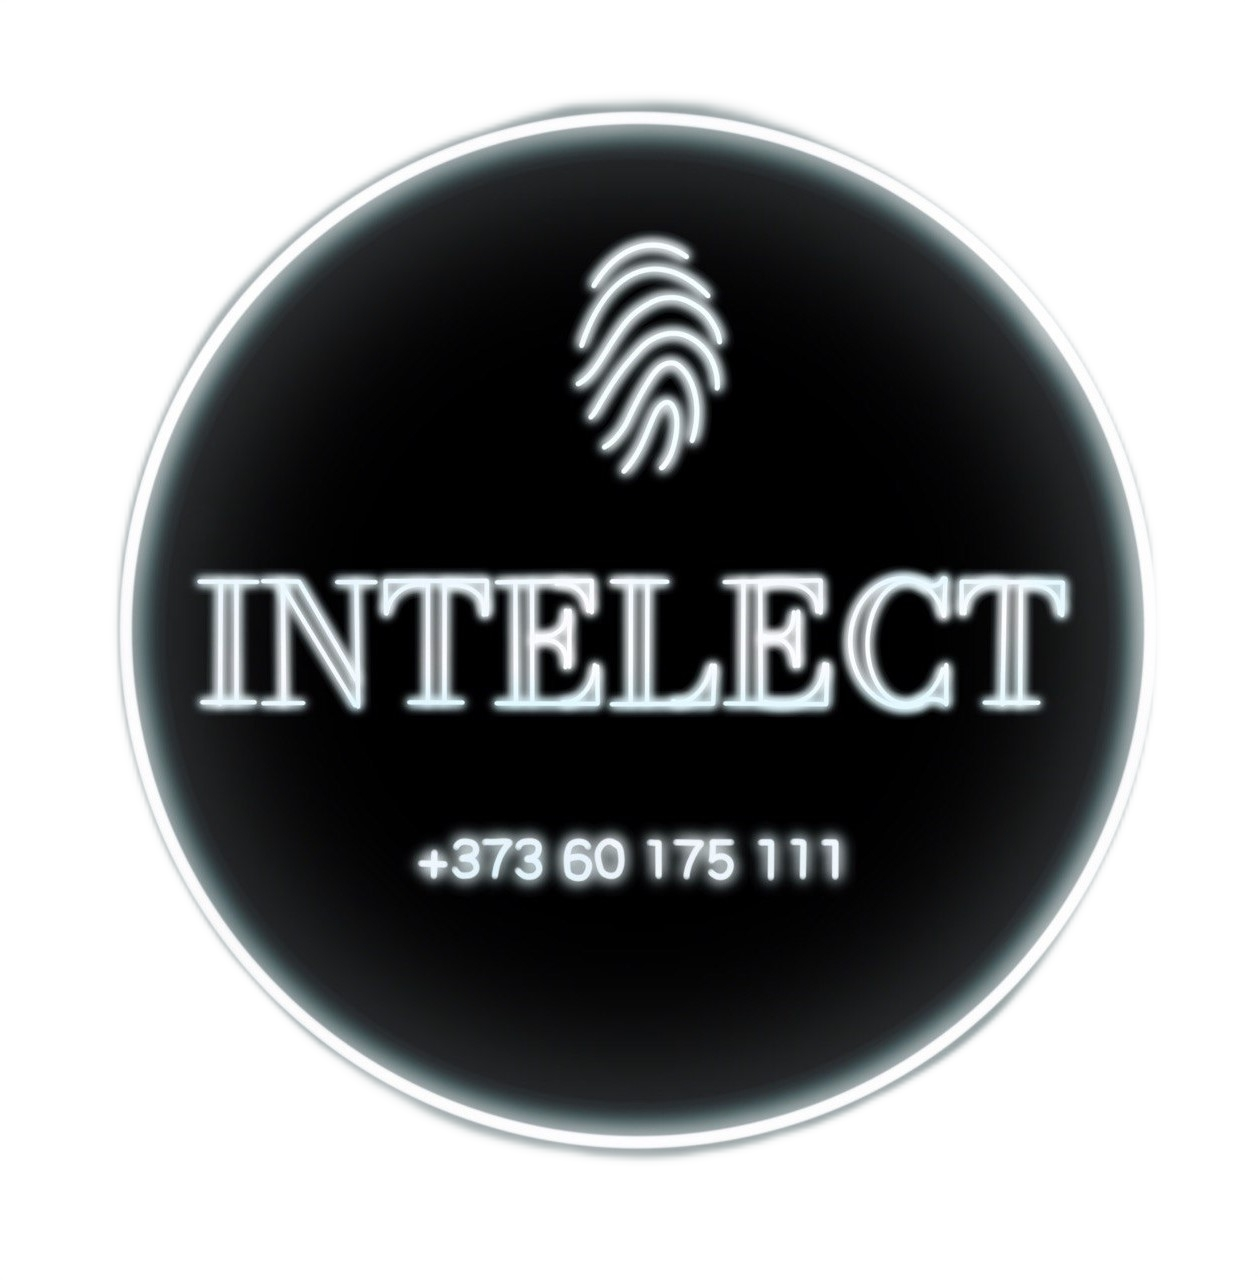  Intelect.md 